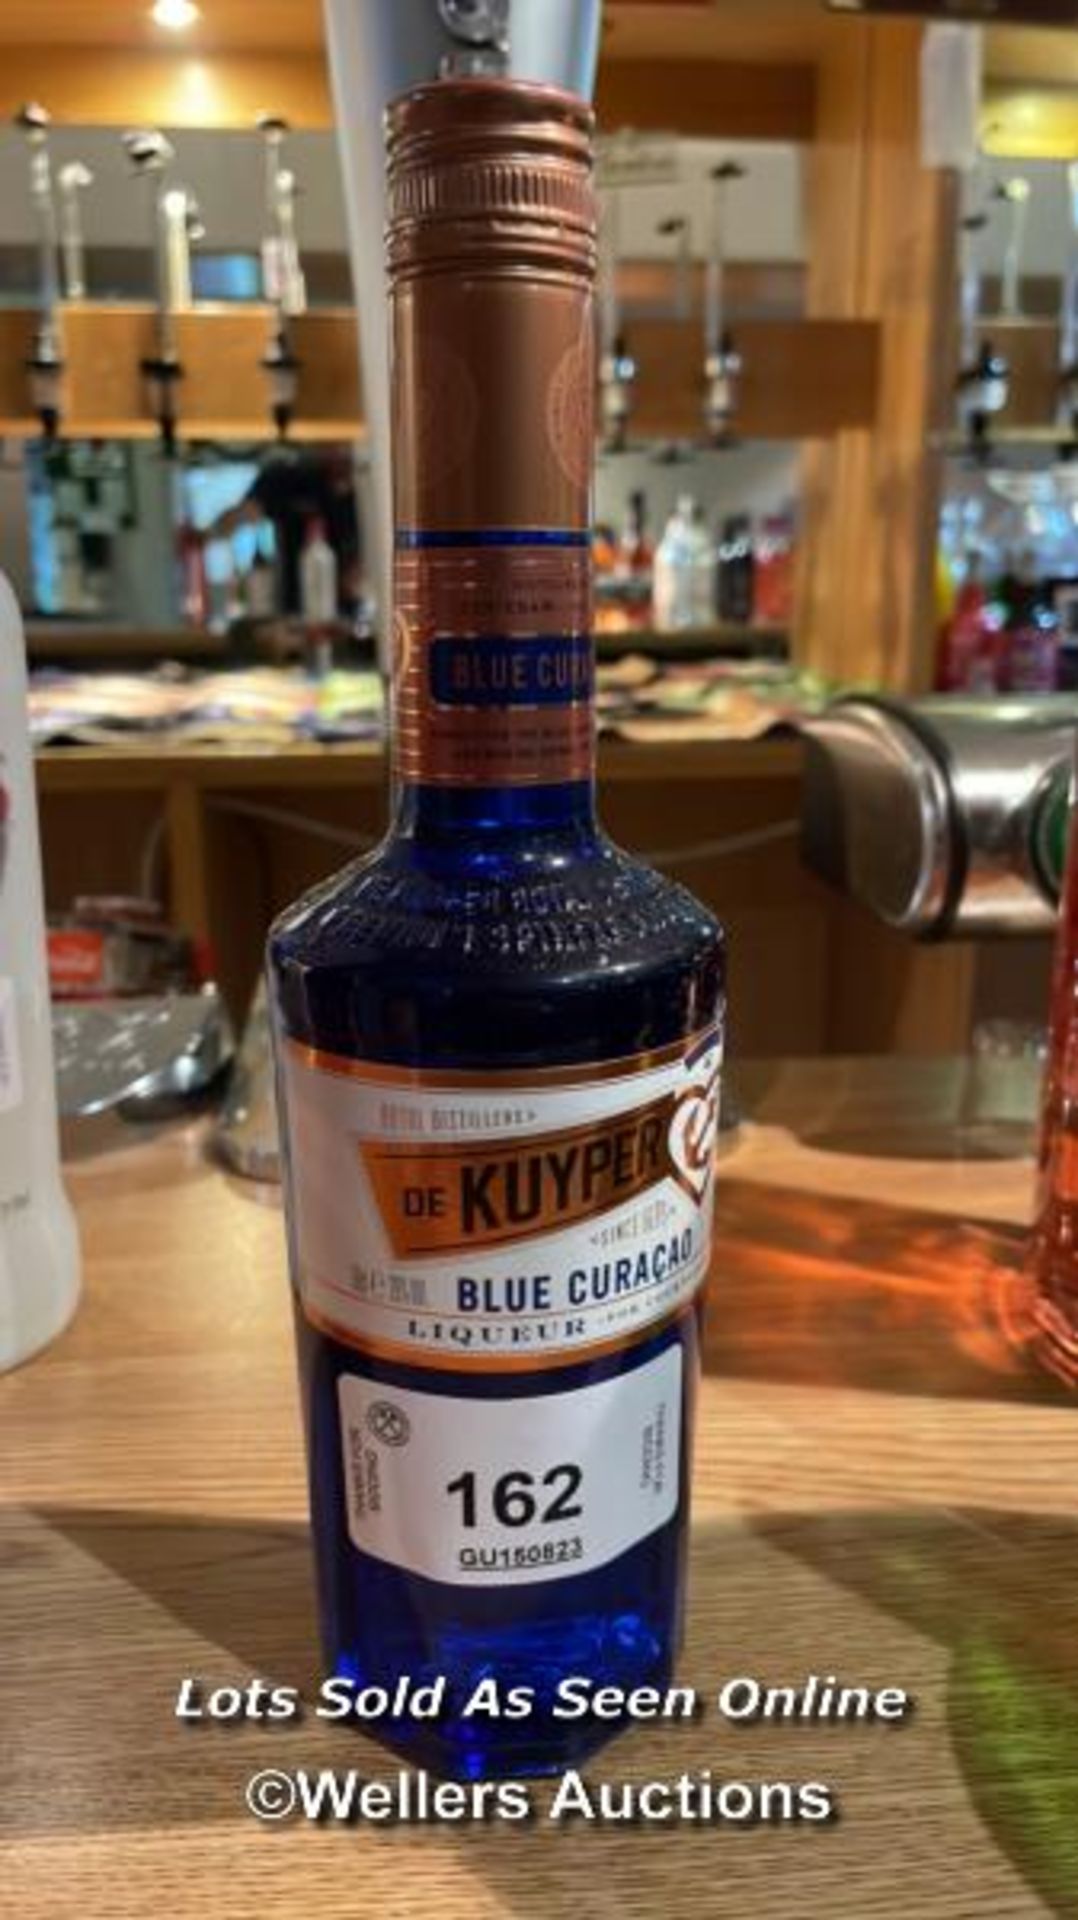 DE KUYPER BLUE CURACO LIQUEUR, FOR COCKTAILS, 500ML, 20% VOL / COLLECTION LOCATION: OLD WOKING